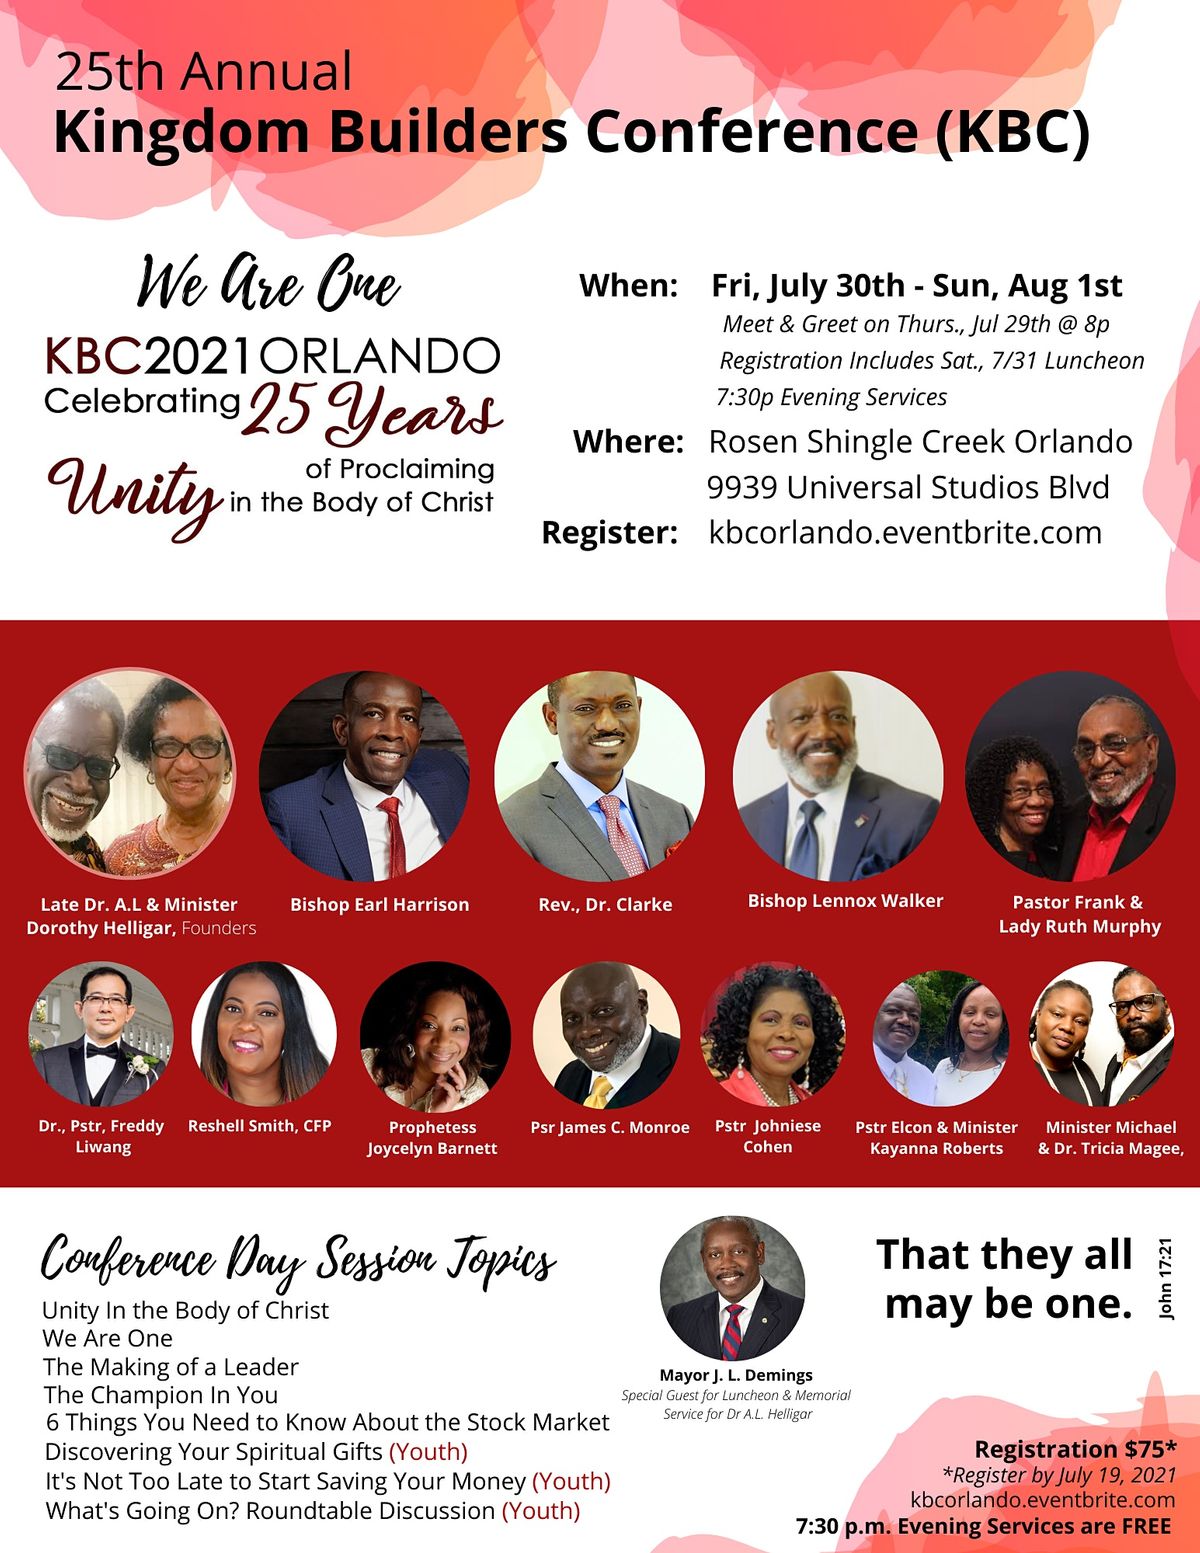 25th Annual Kingdom Builders Conference